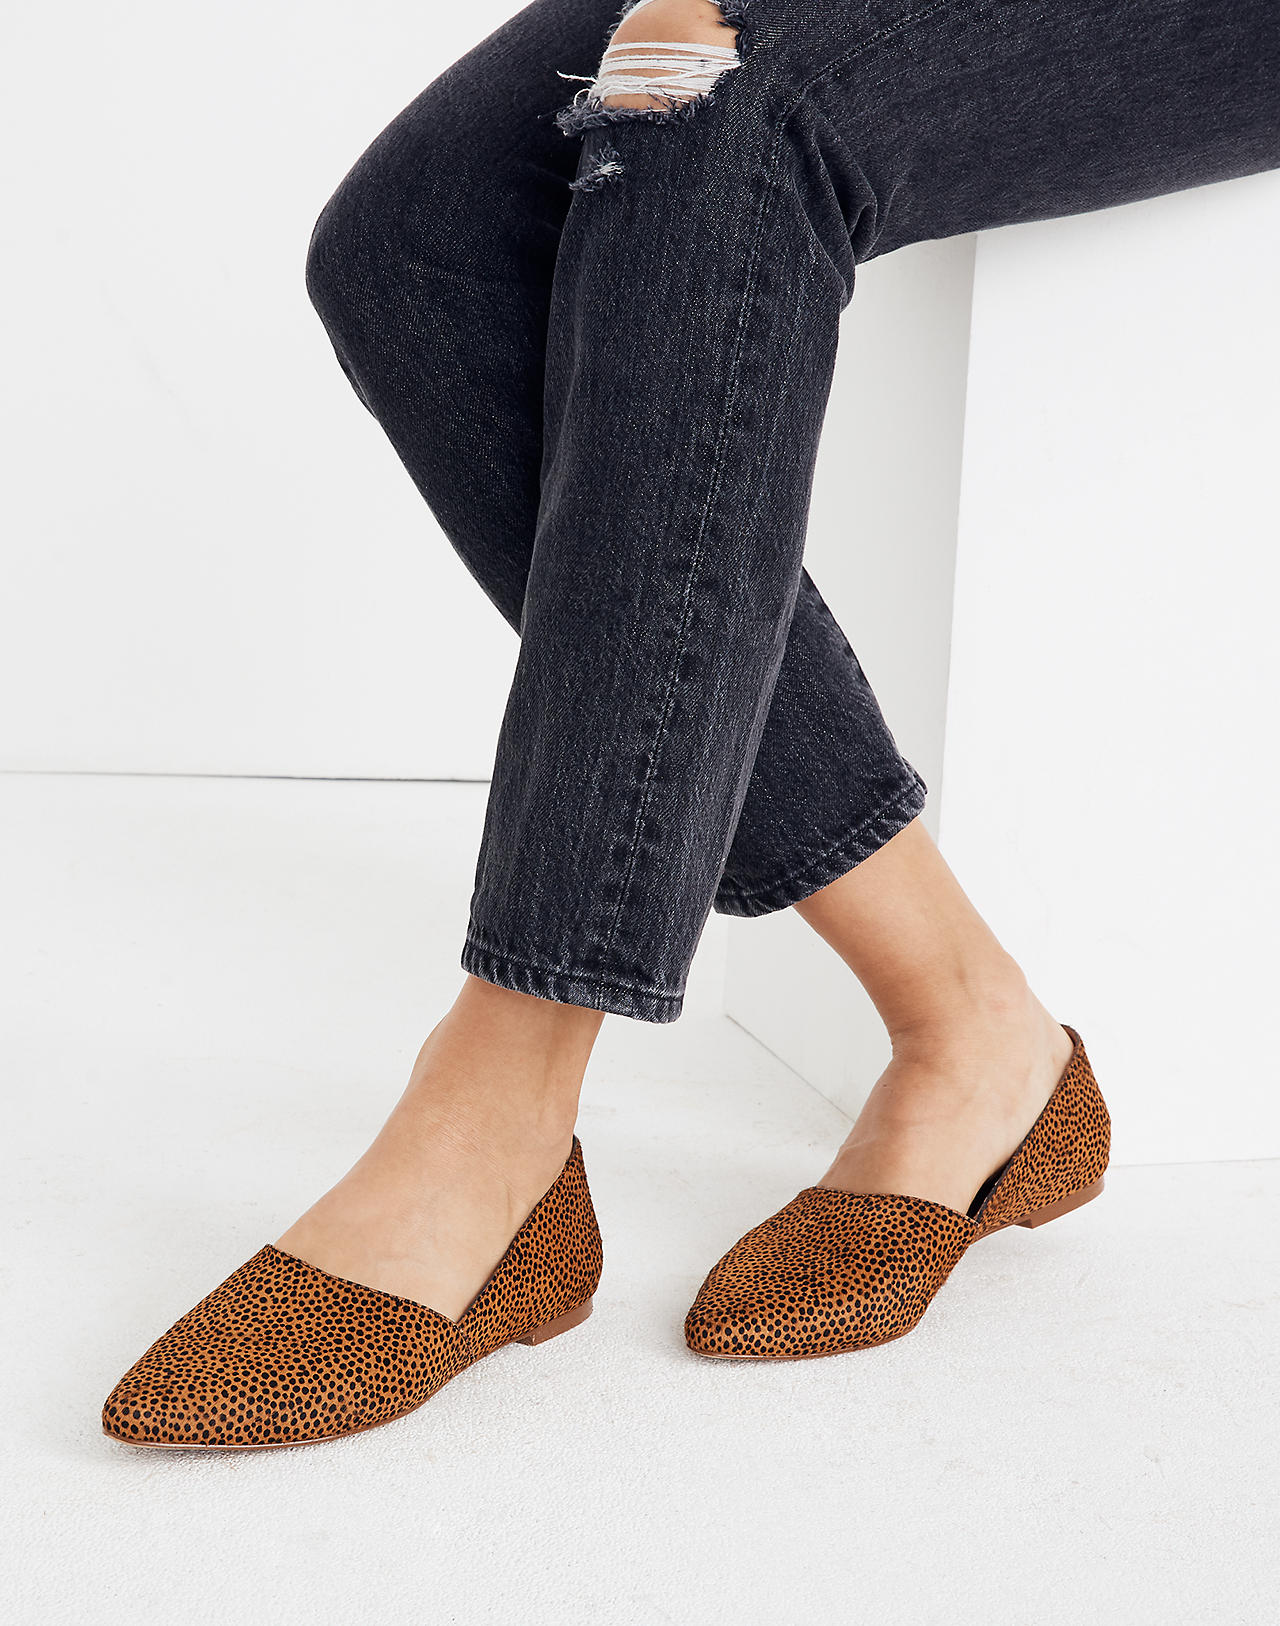 The Lizbeth Flat in Dotted Calf Hair